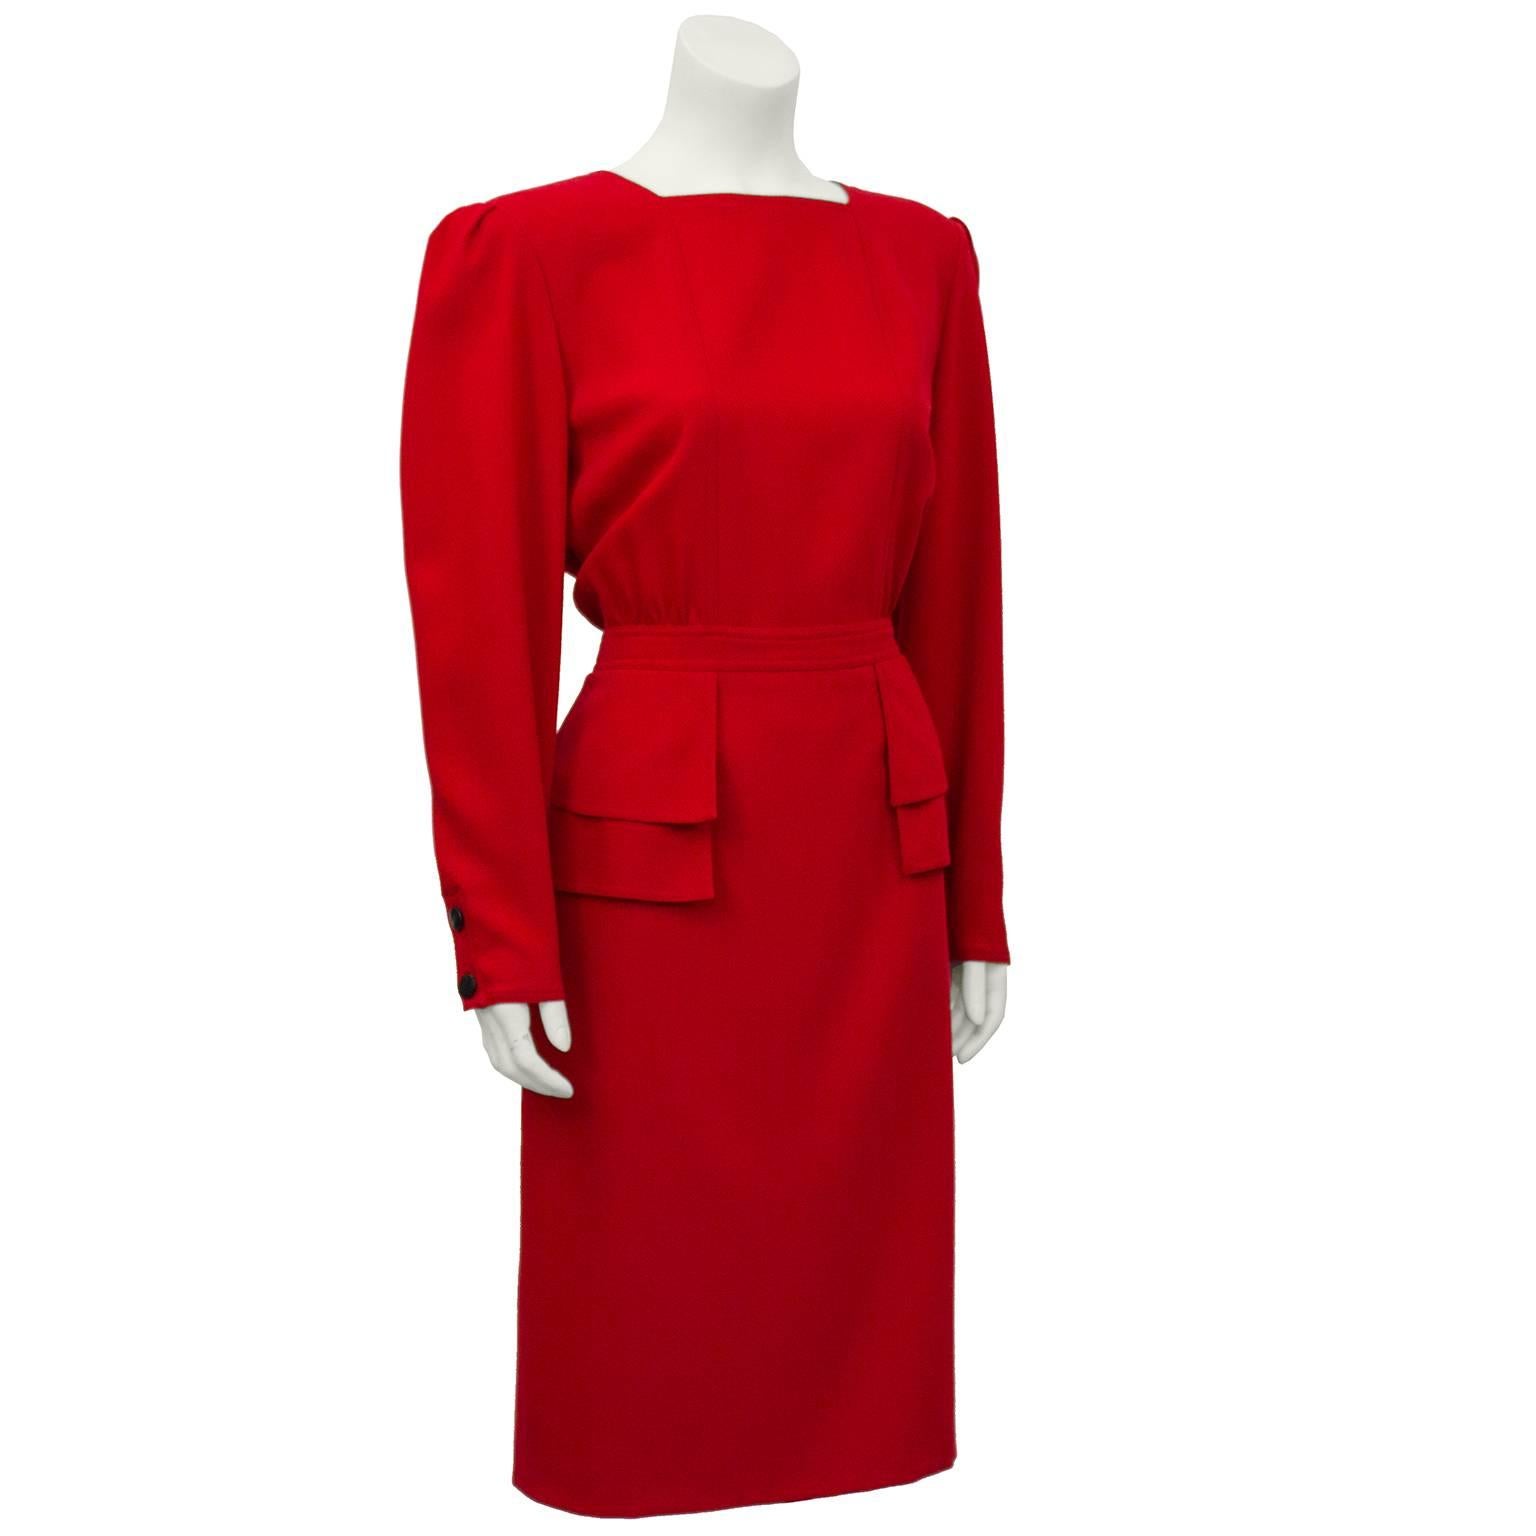 Classic 1980's Valentino red wool dress. Square neckline, details at waist and large (removable) shoulder pads. Valentino signature red dress appeared in every collection, in day and evening versions. Contrasting black buttons up the back and